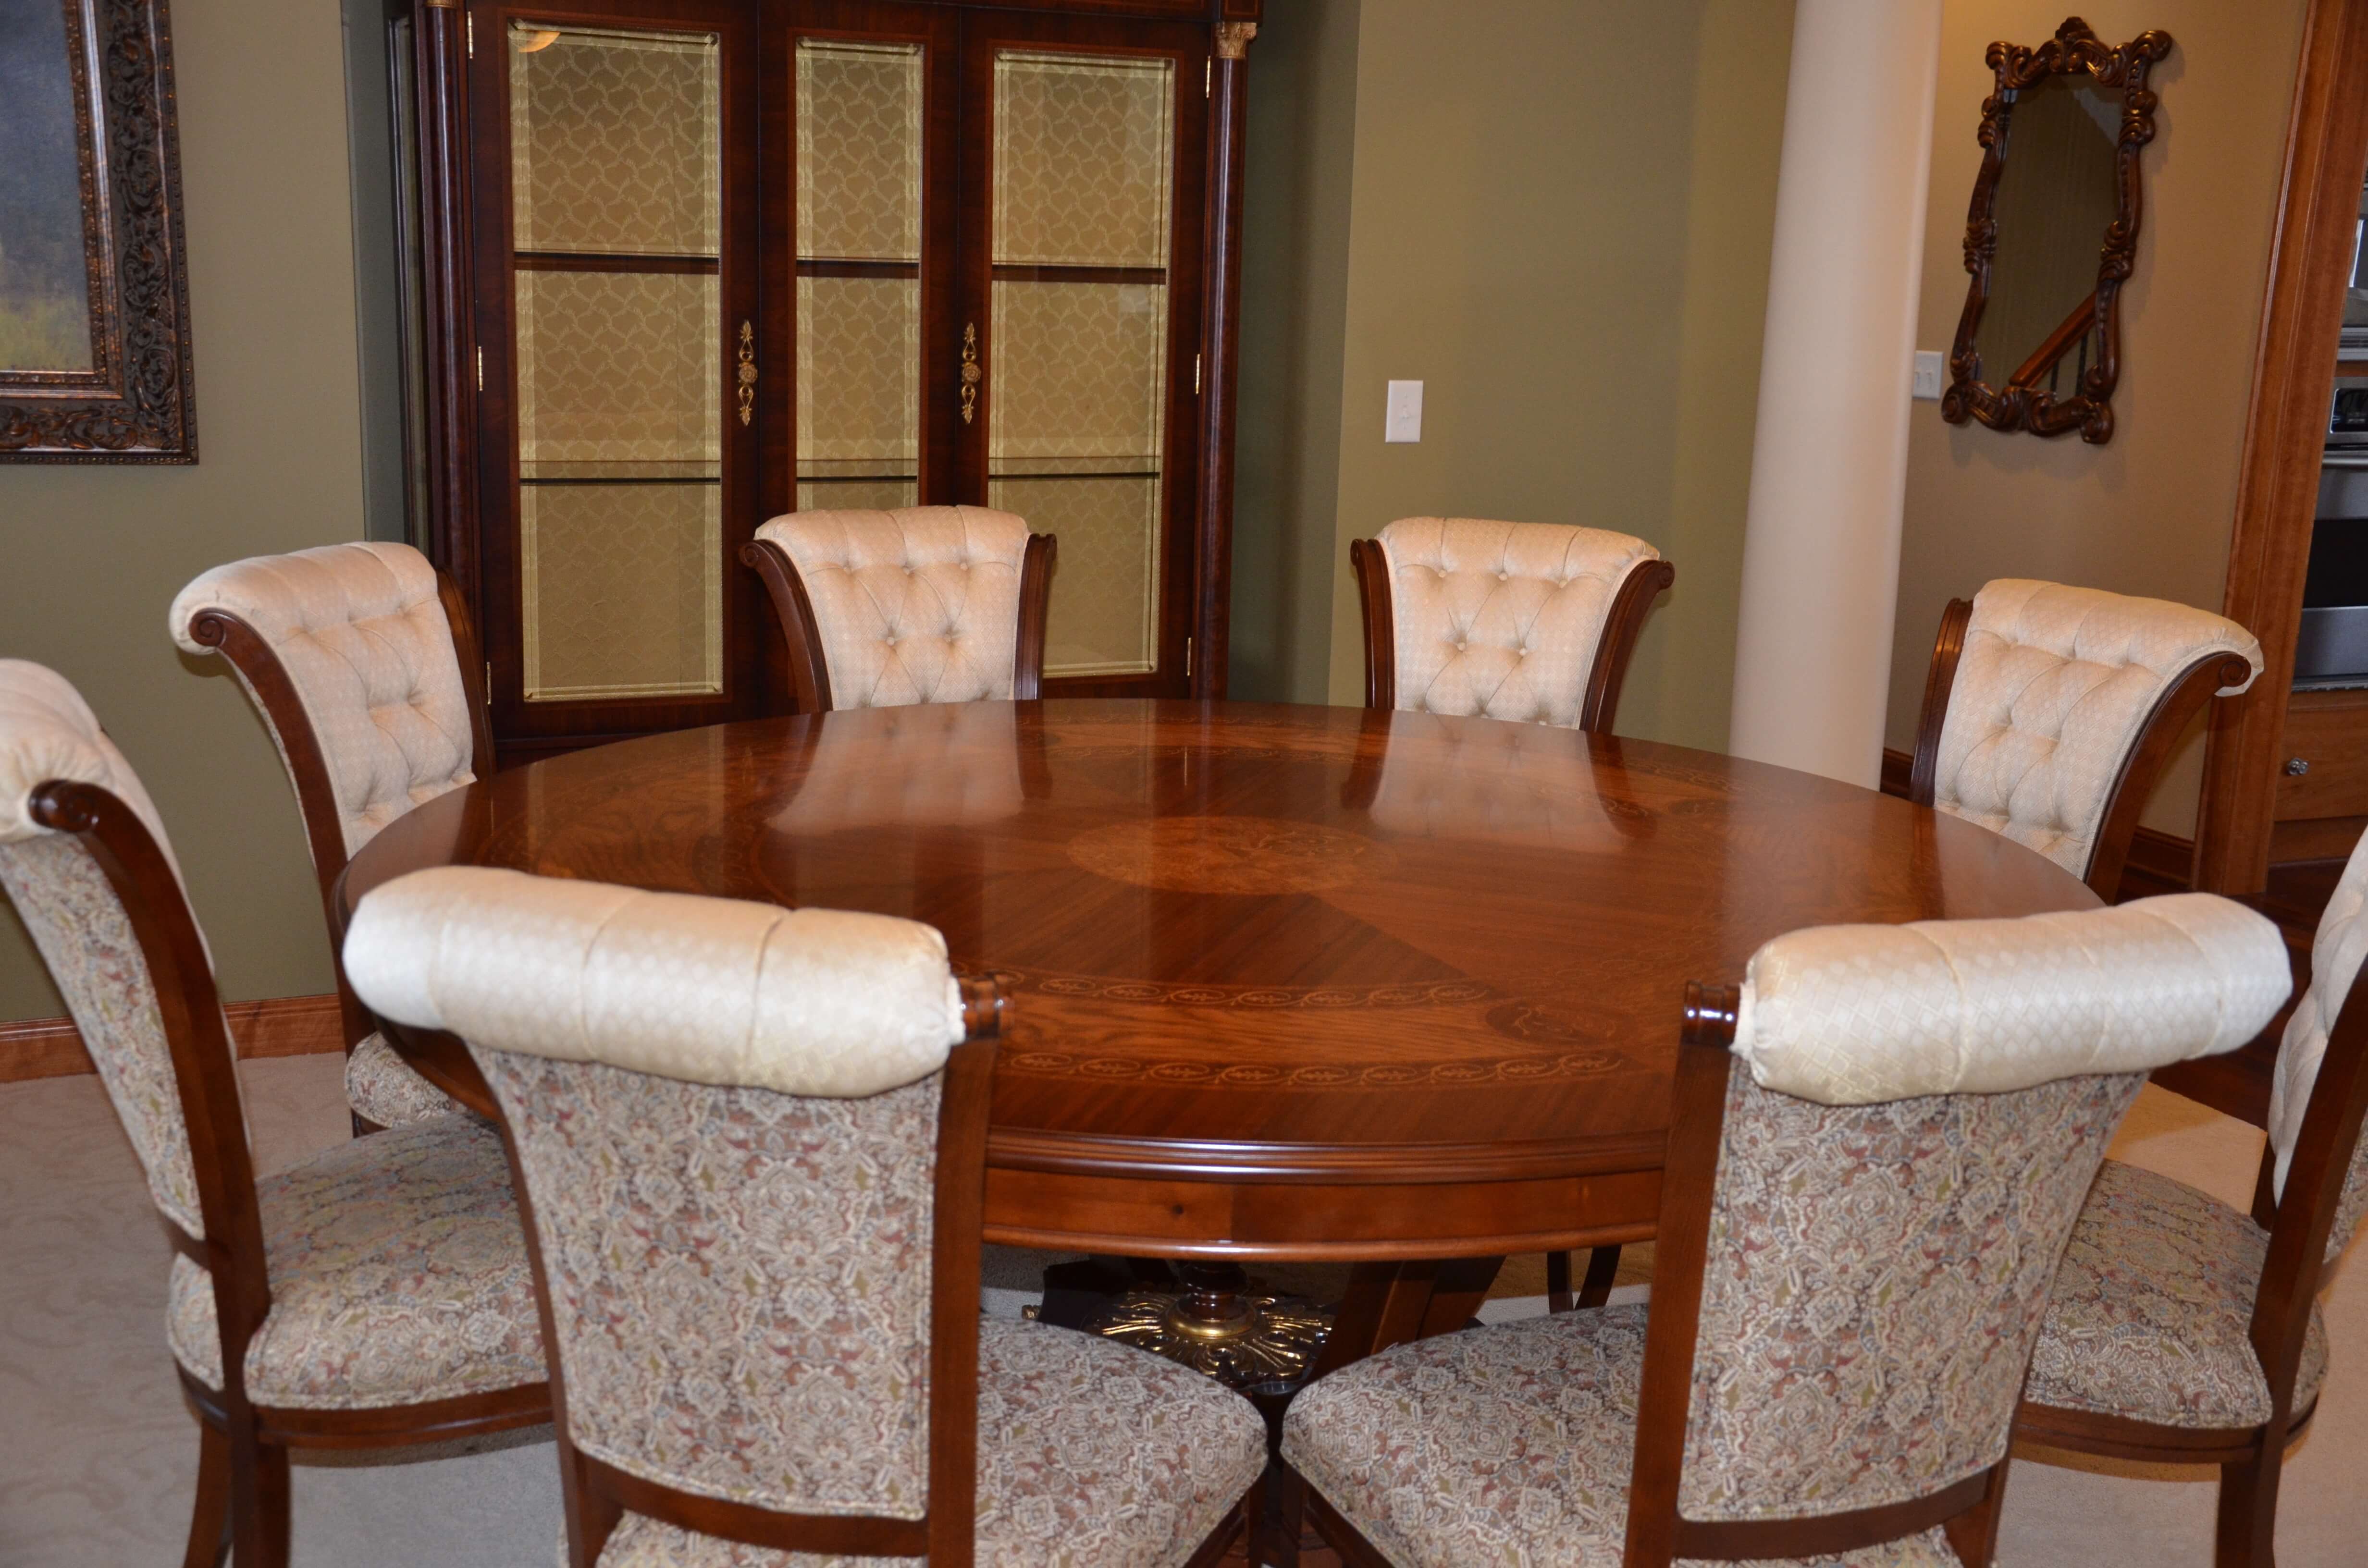 8 Seater Round Dining Table And Chairs / Kennedy Dining Suite In